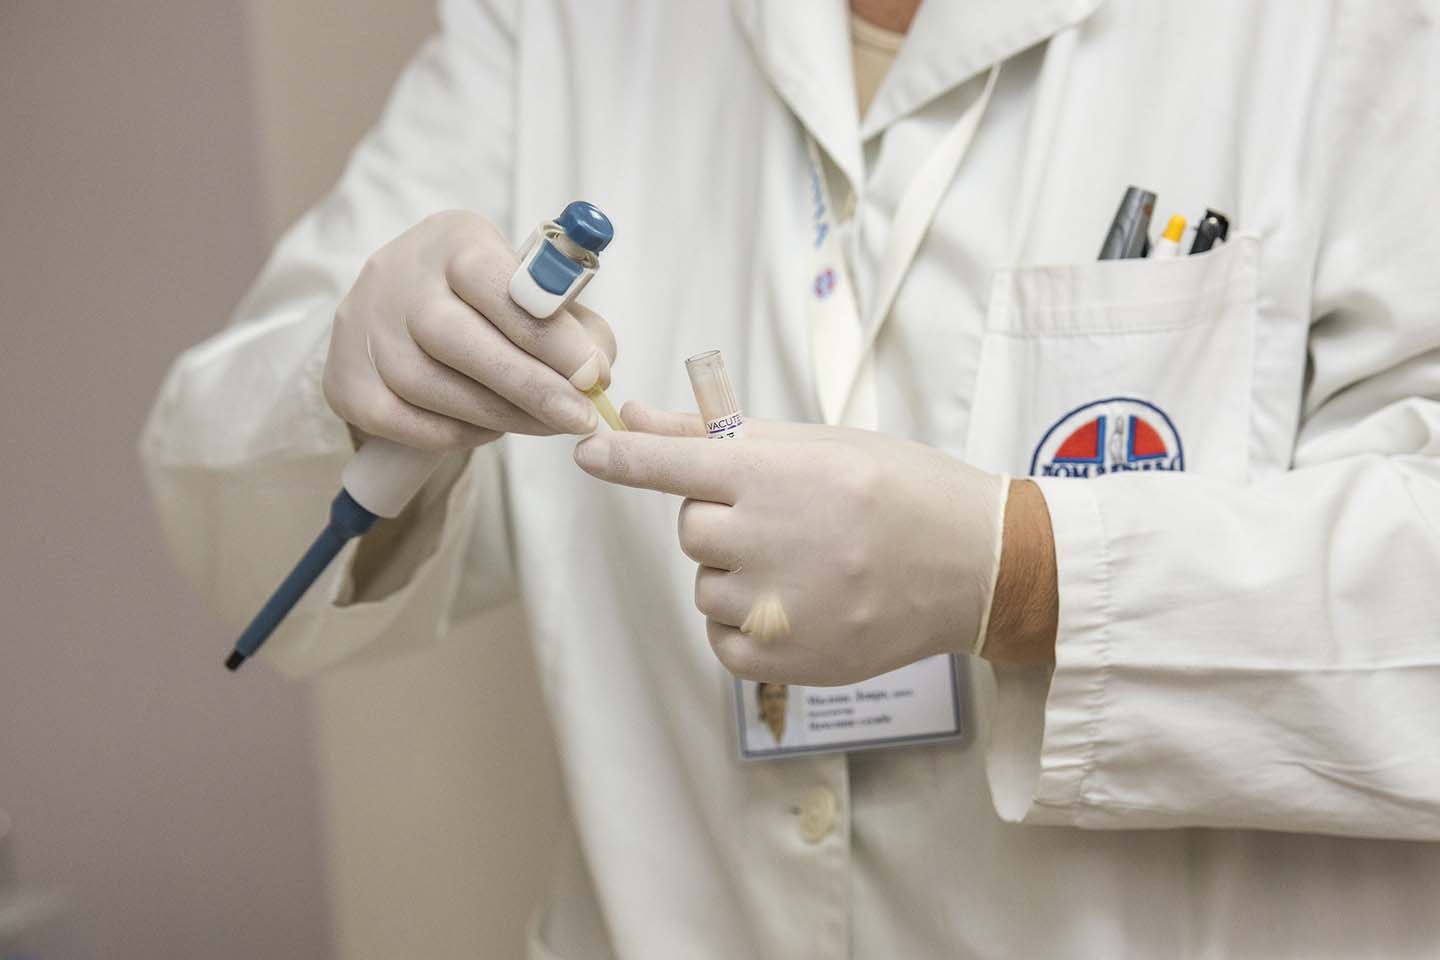 Person in lab coat holds medical equipment in hand while wearing white gloves.